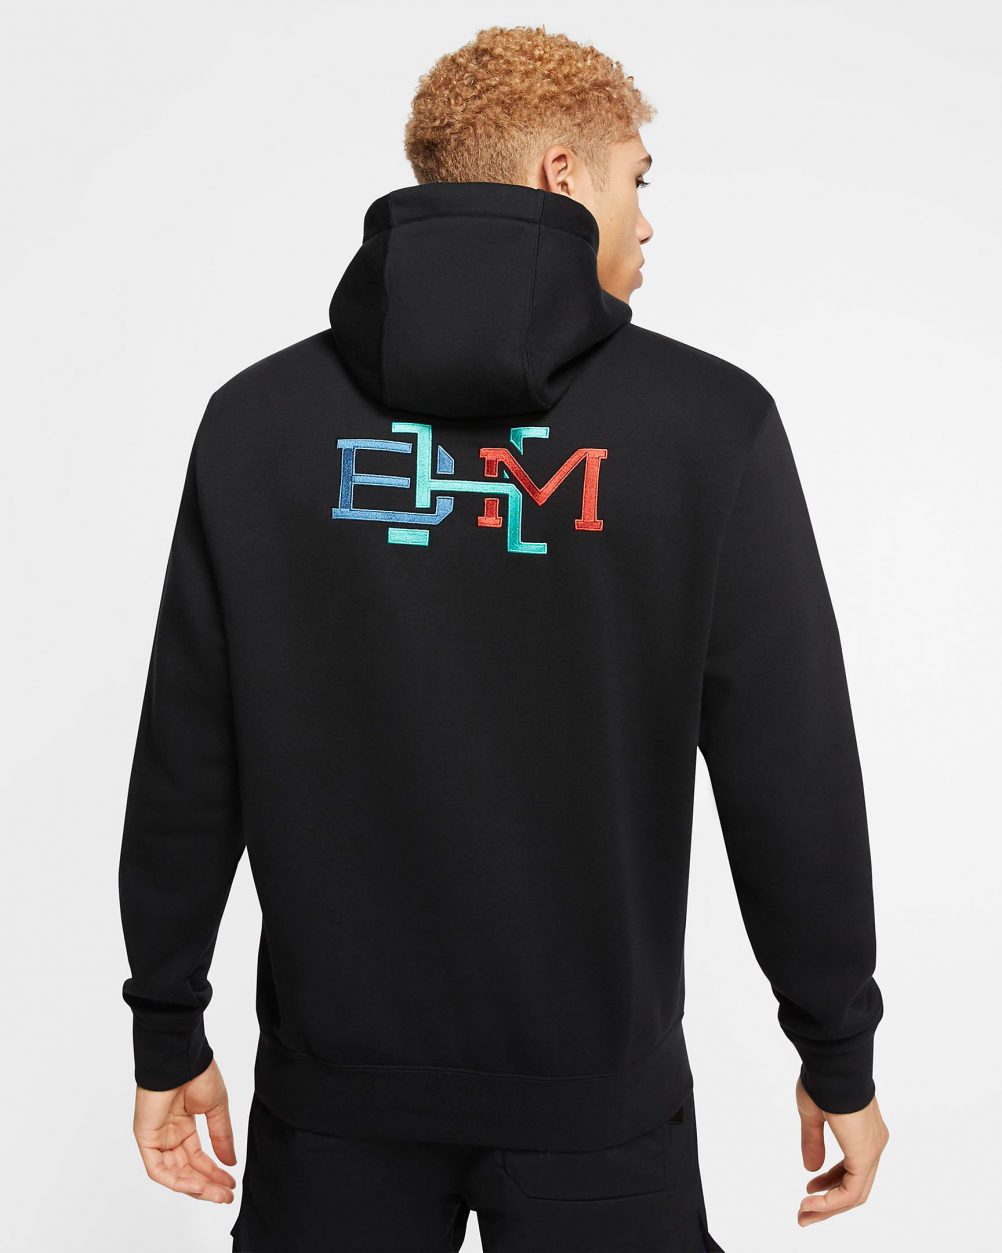 Nike BHM 2020 Sneakers and Clothing